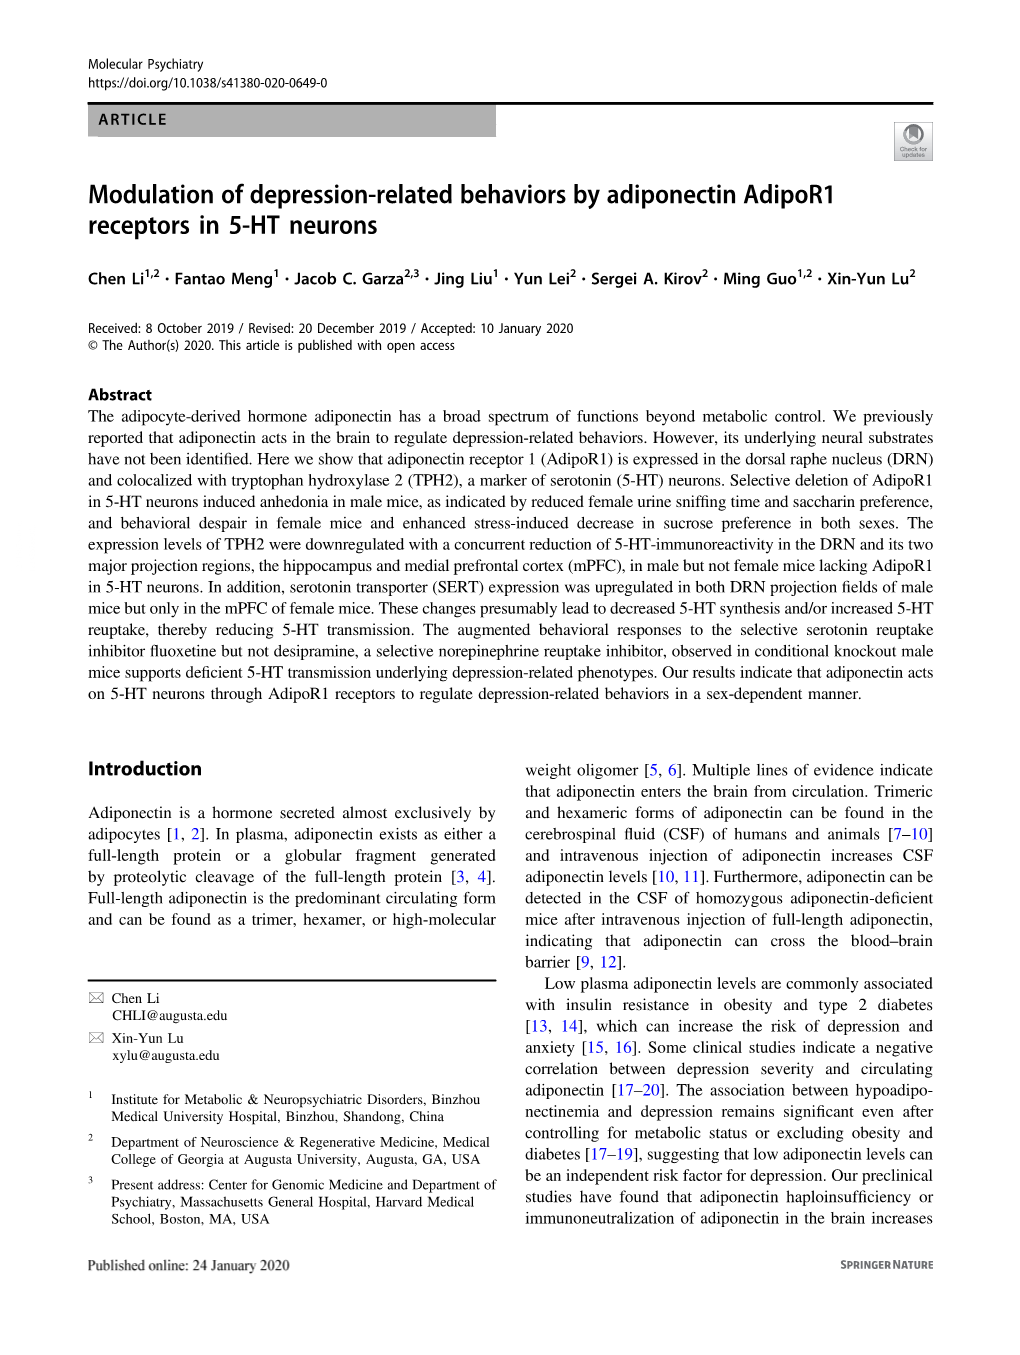 Modulation of Depression-Related Behaviors by Adiponectin Adipor1 Receptors in 5-HT Neurons